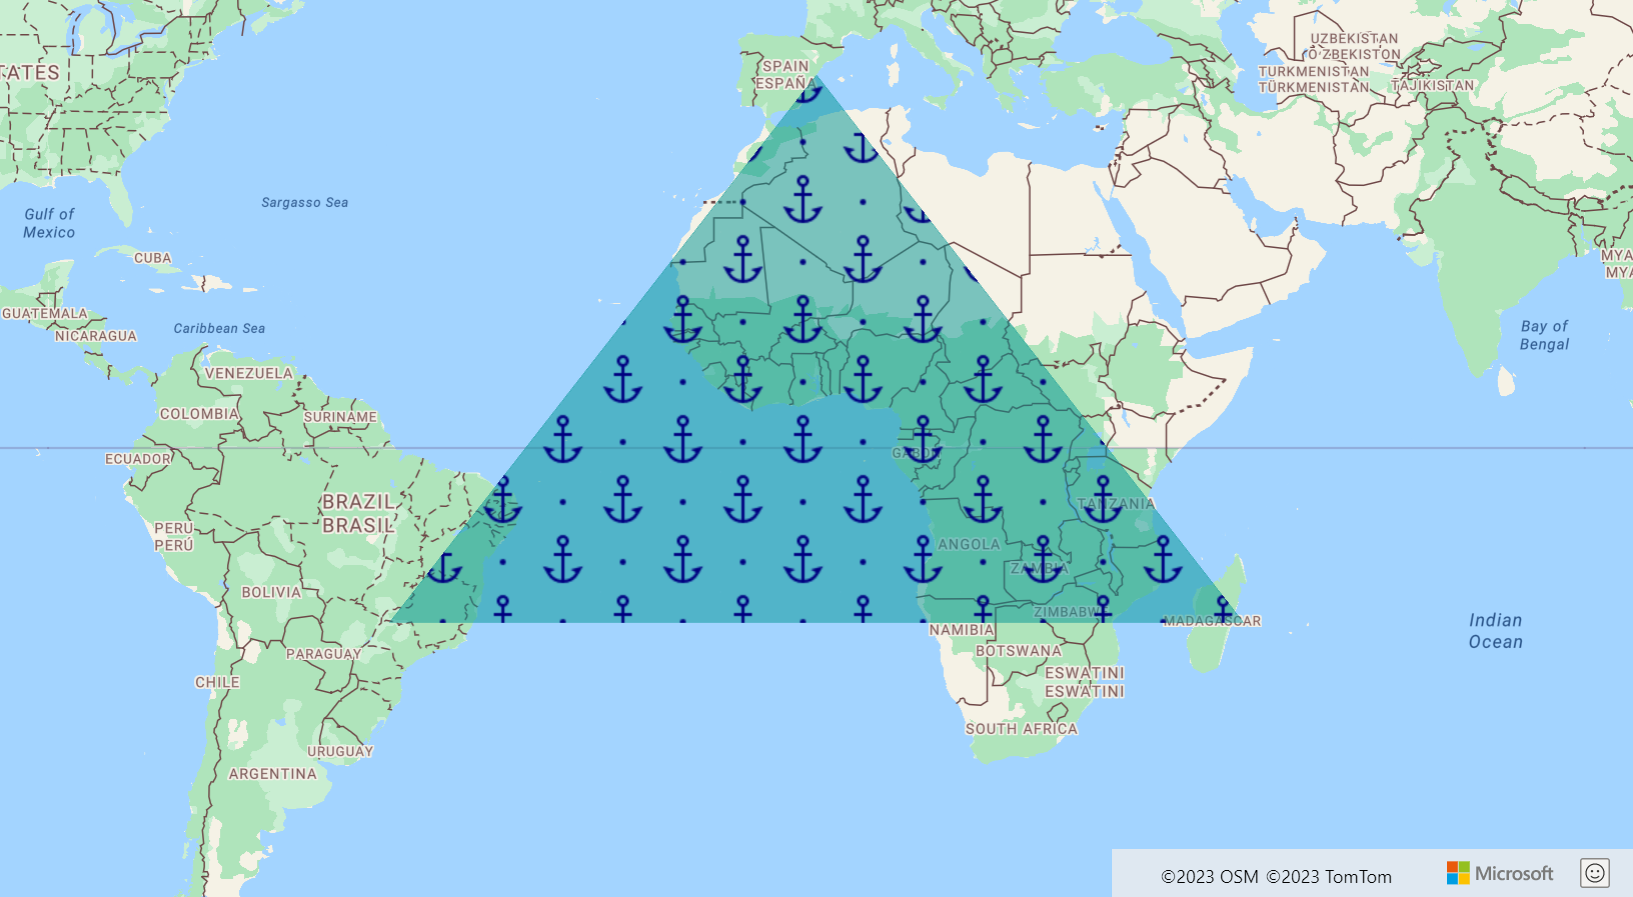 Screenshot showing a map displaying a polygon layer in the shape of a big green triangle with multiple images of blue anchors inside.